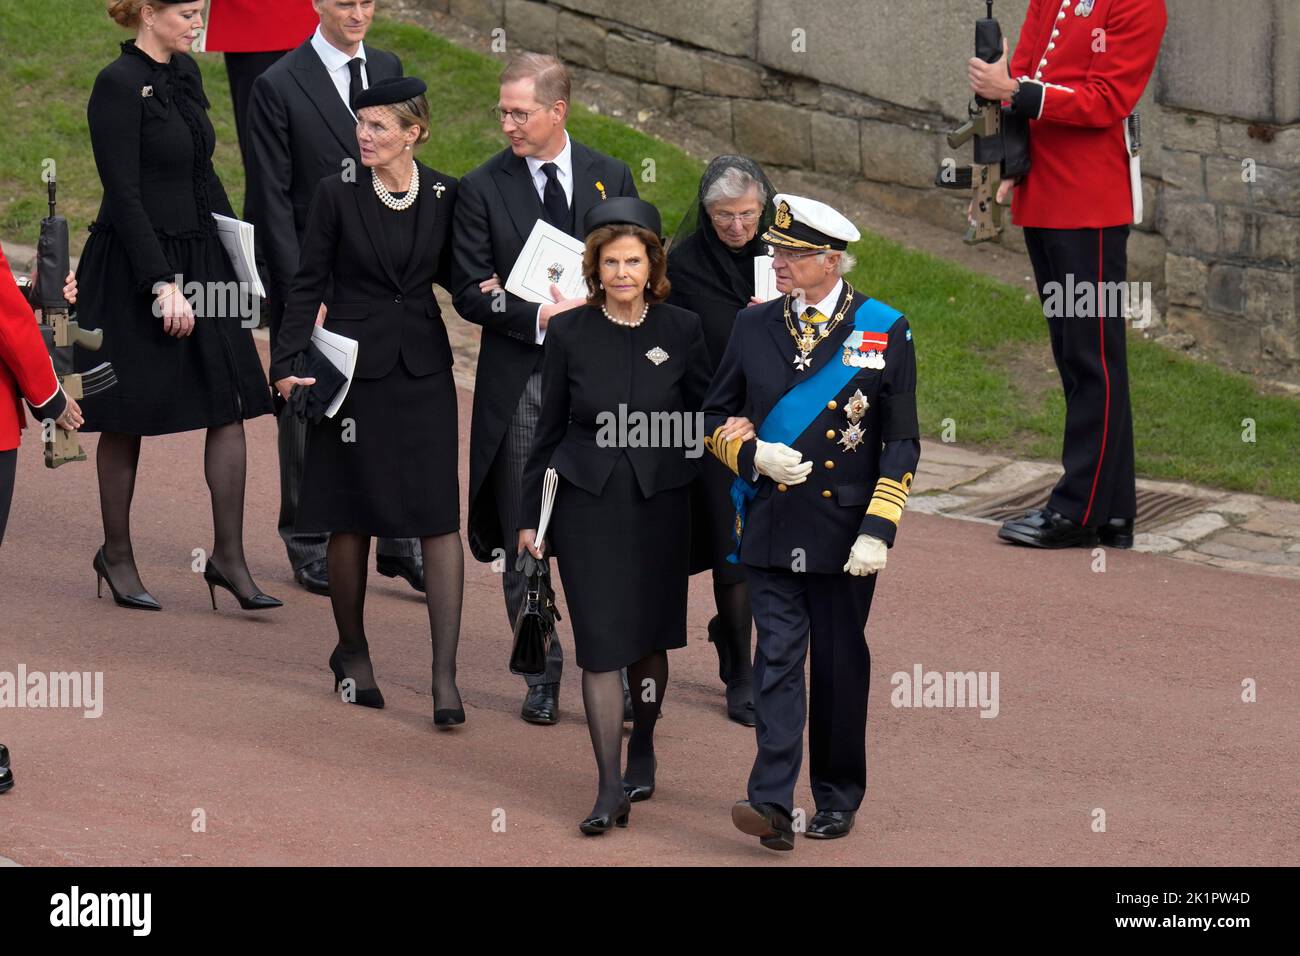 Sweden's King Carl Gustav and Queen Silvia arrive ahead of the Committal Service of Queen Elizabeth II at St George's Chapel at Windsor Castle in Berkshire. Picture date: Monday September 19, 2022. Stock Photo